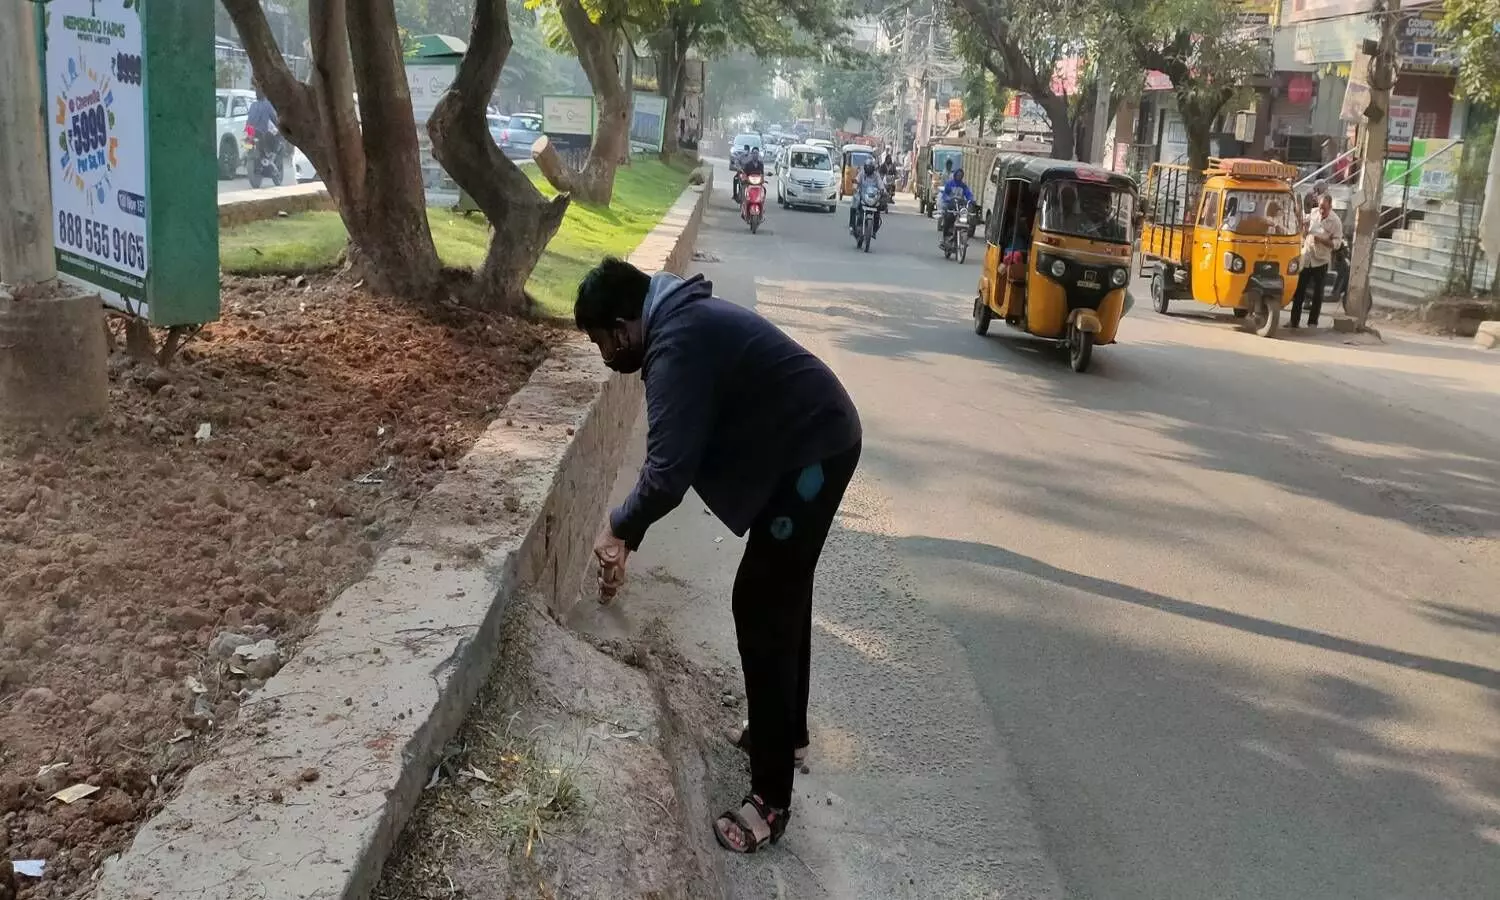 Tired of Nizampet authorities apathy, residents take up cleaning of sand piles on roads